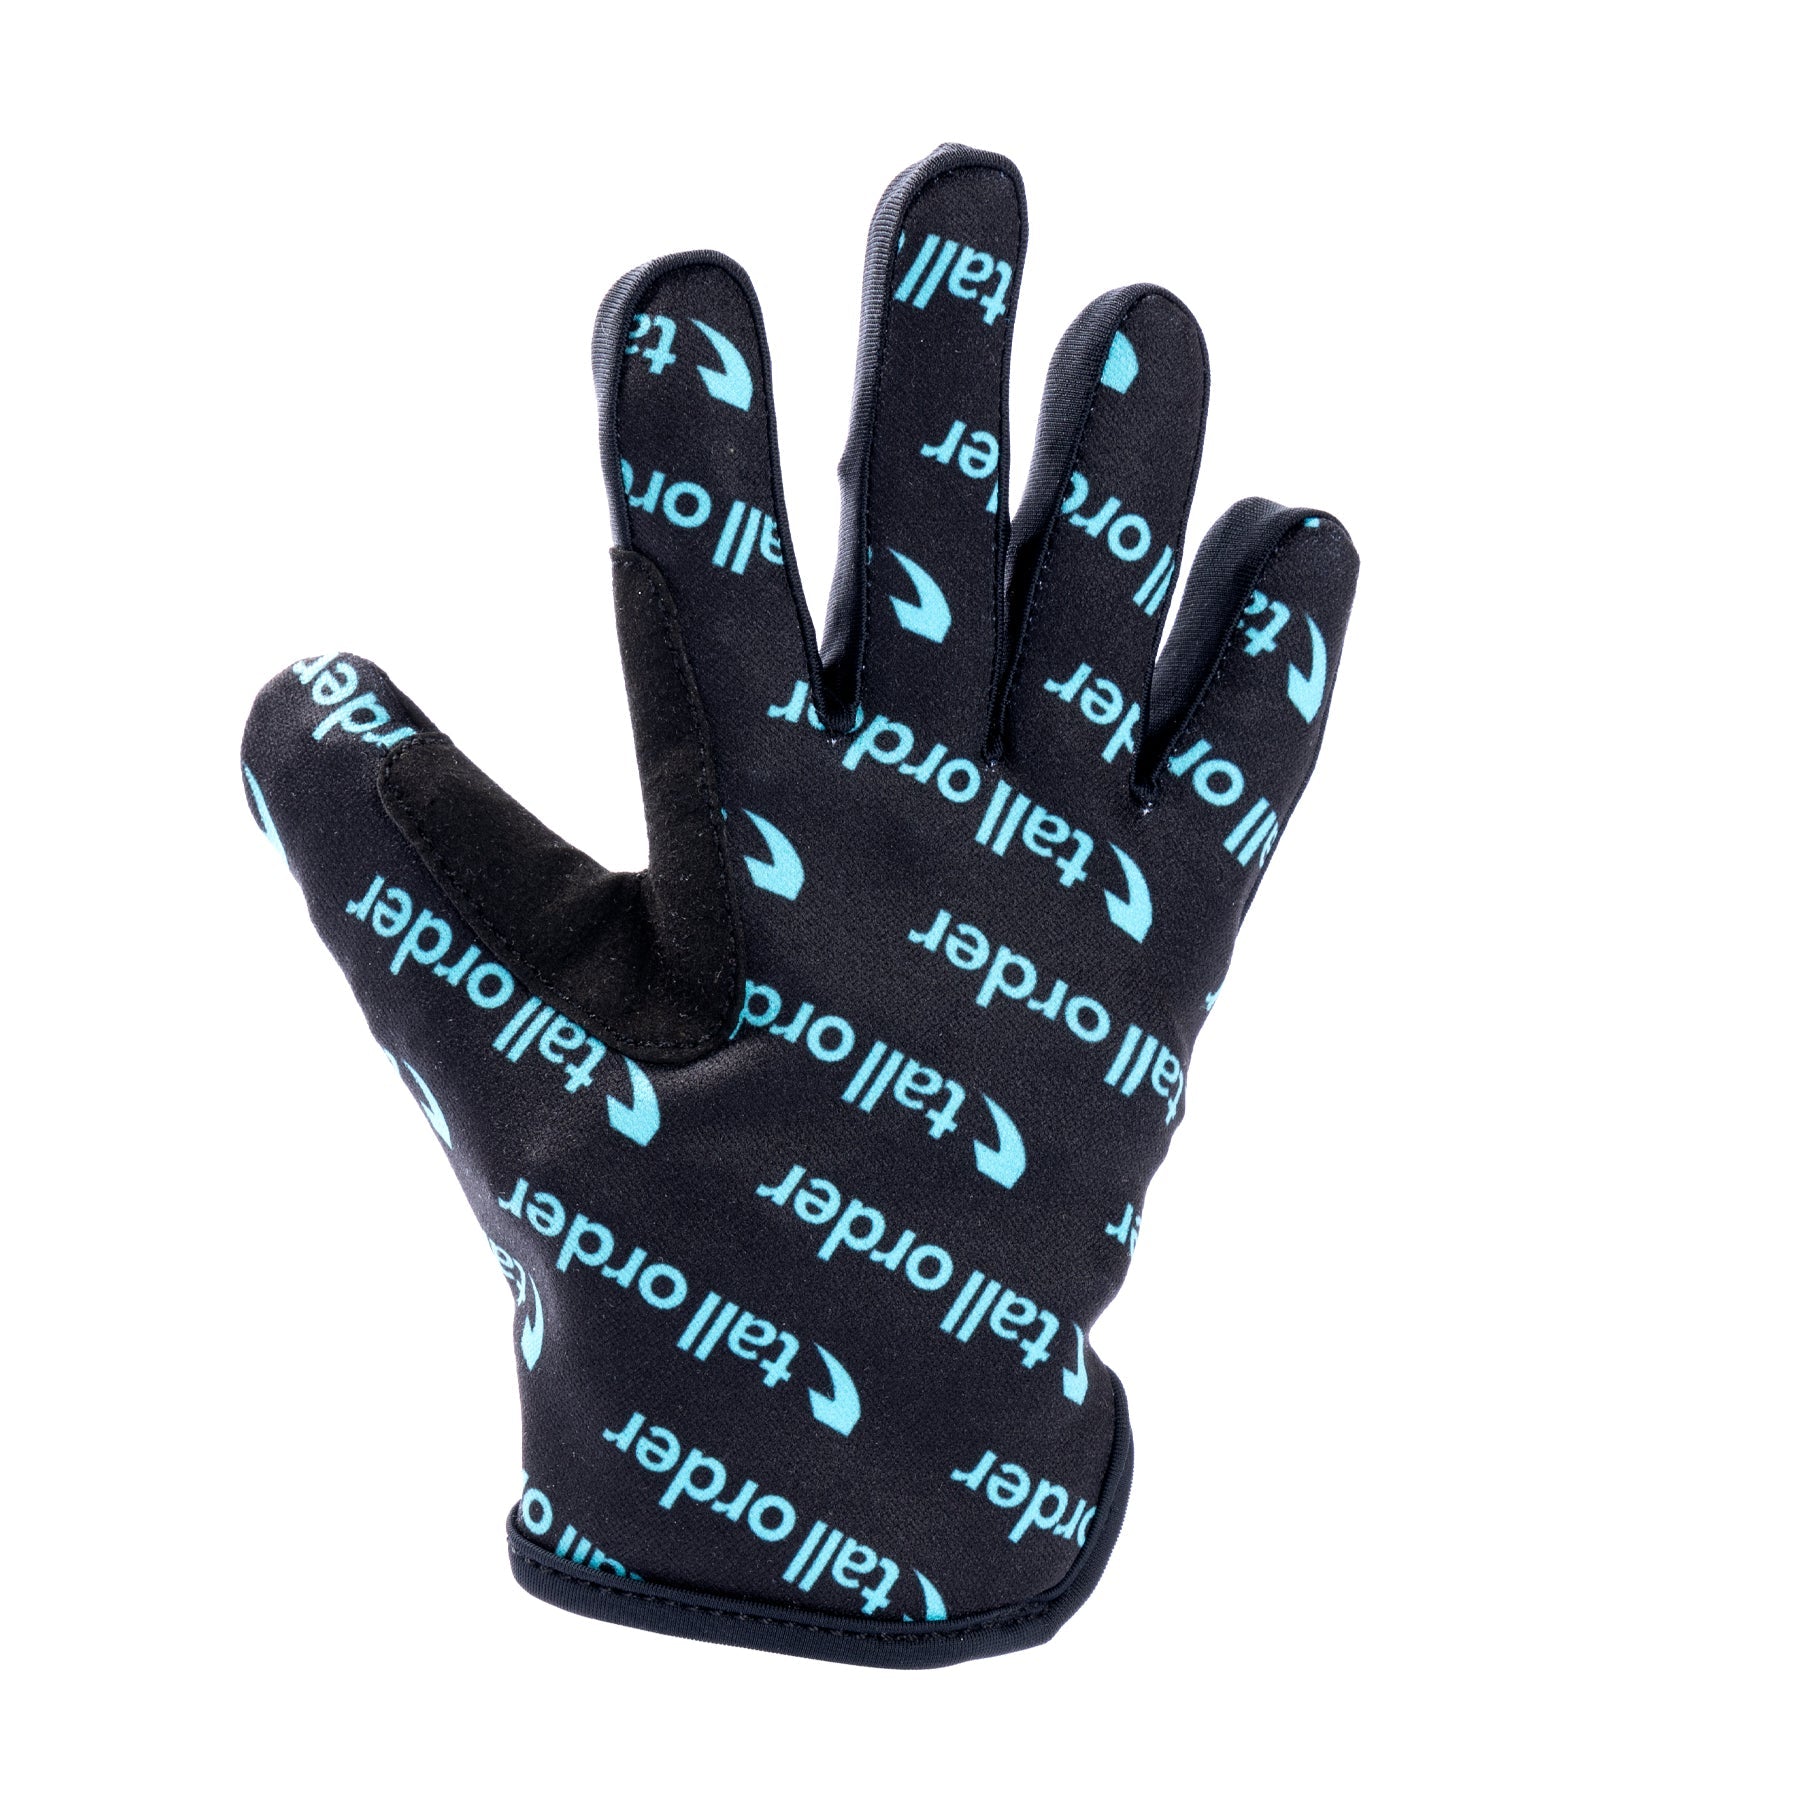 Tall Order Barspin Print Youth Glove - Black With Teal Print